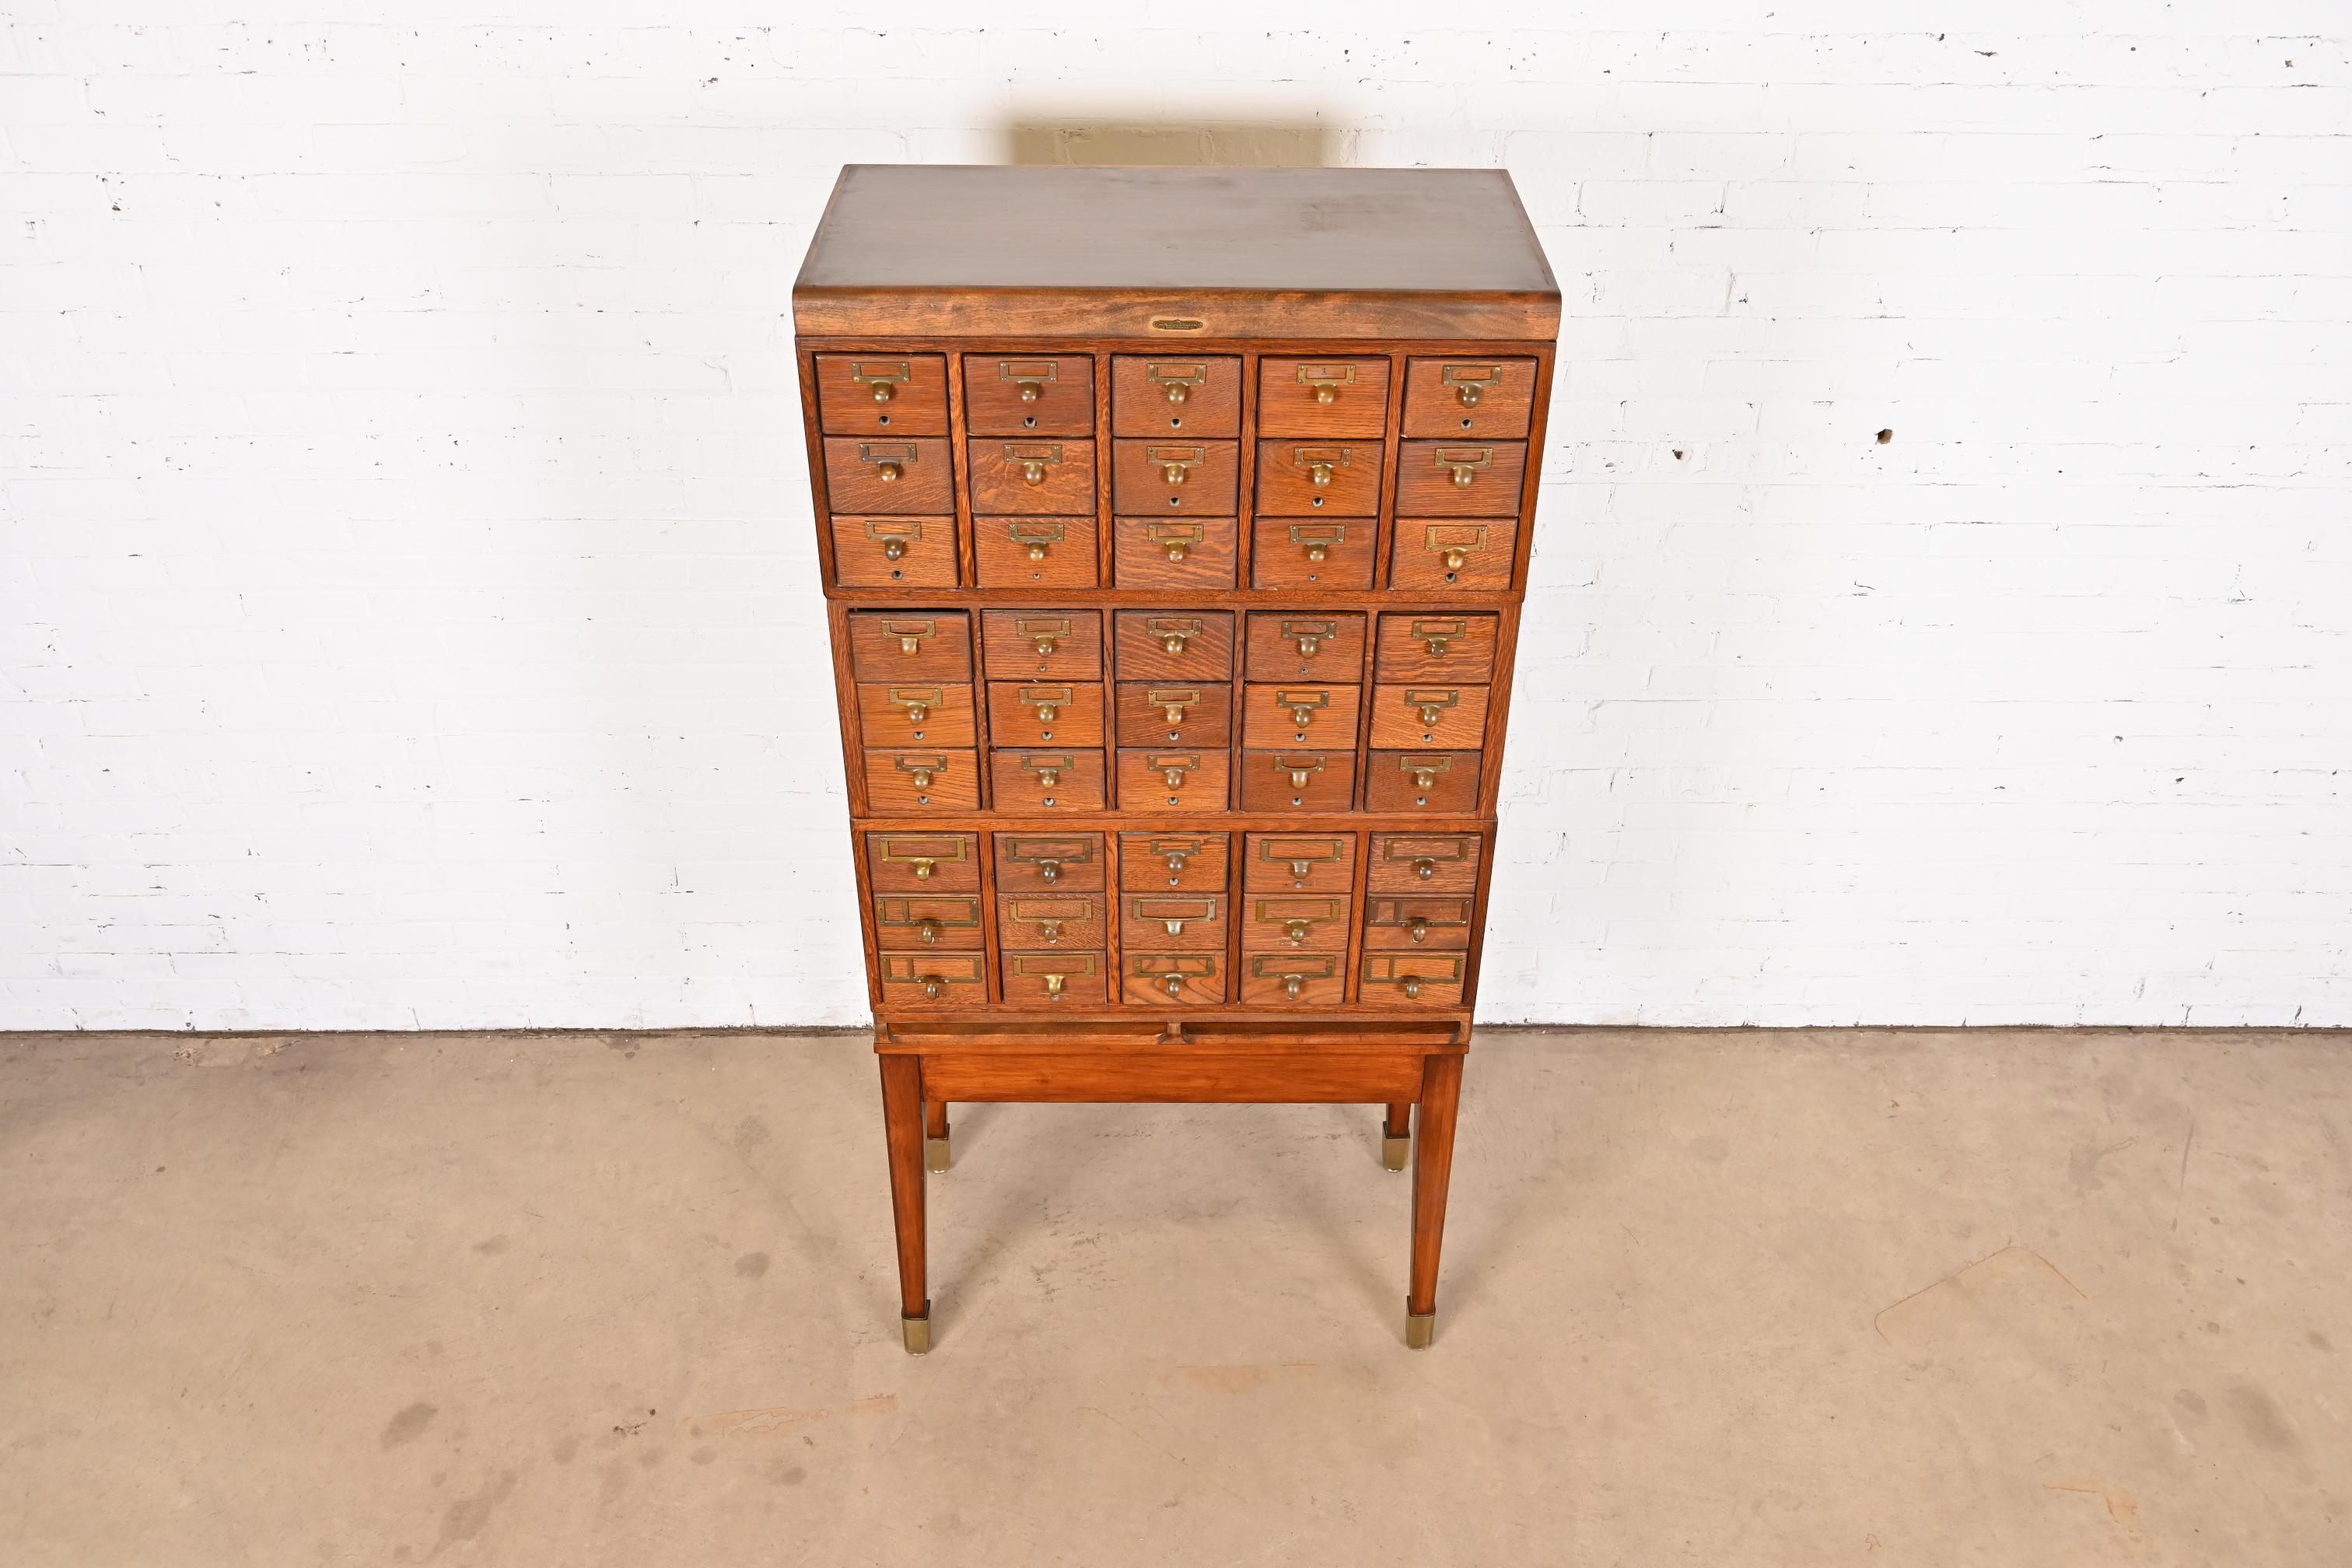 Antique Arts & Crafts 45-Drawer Card Catalog Filing Cabinet by Remington Rand In Good Condition For Sale In South Bend, IN